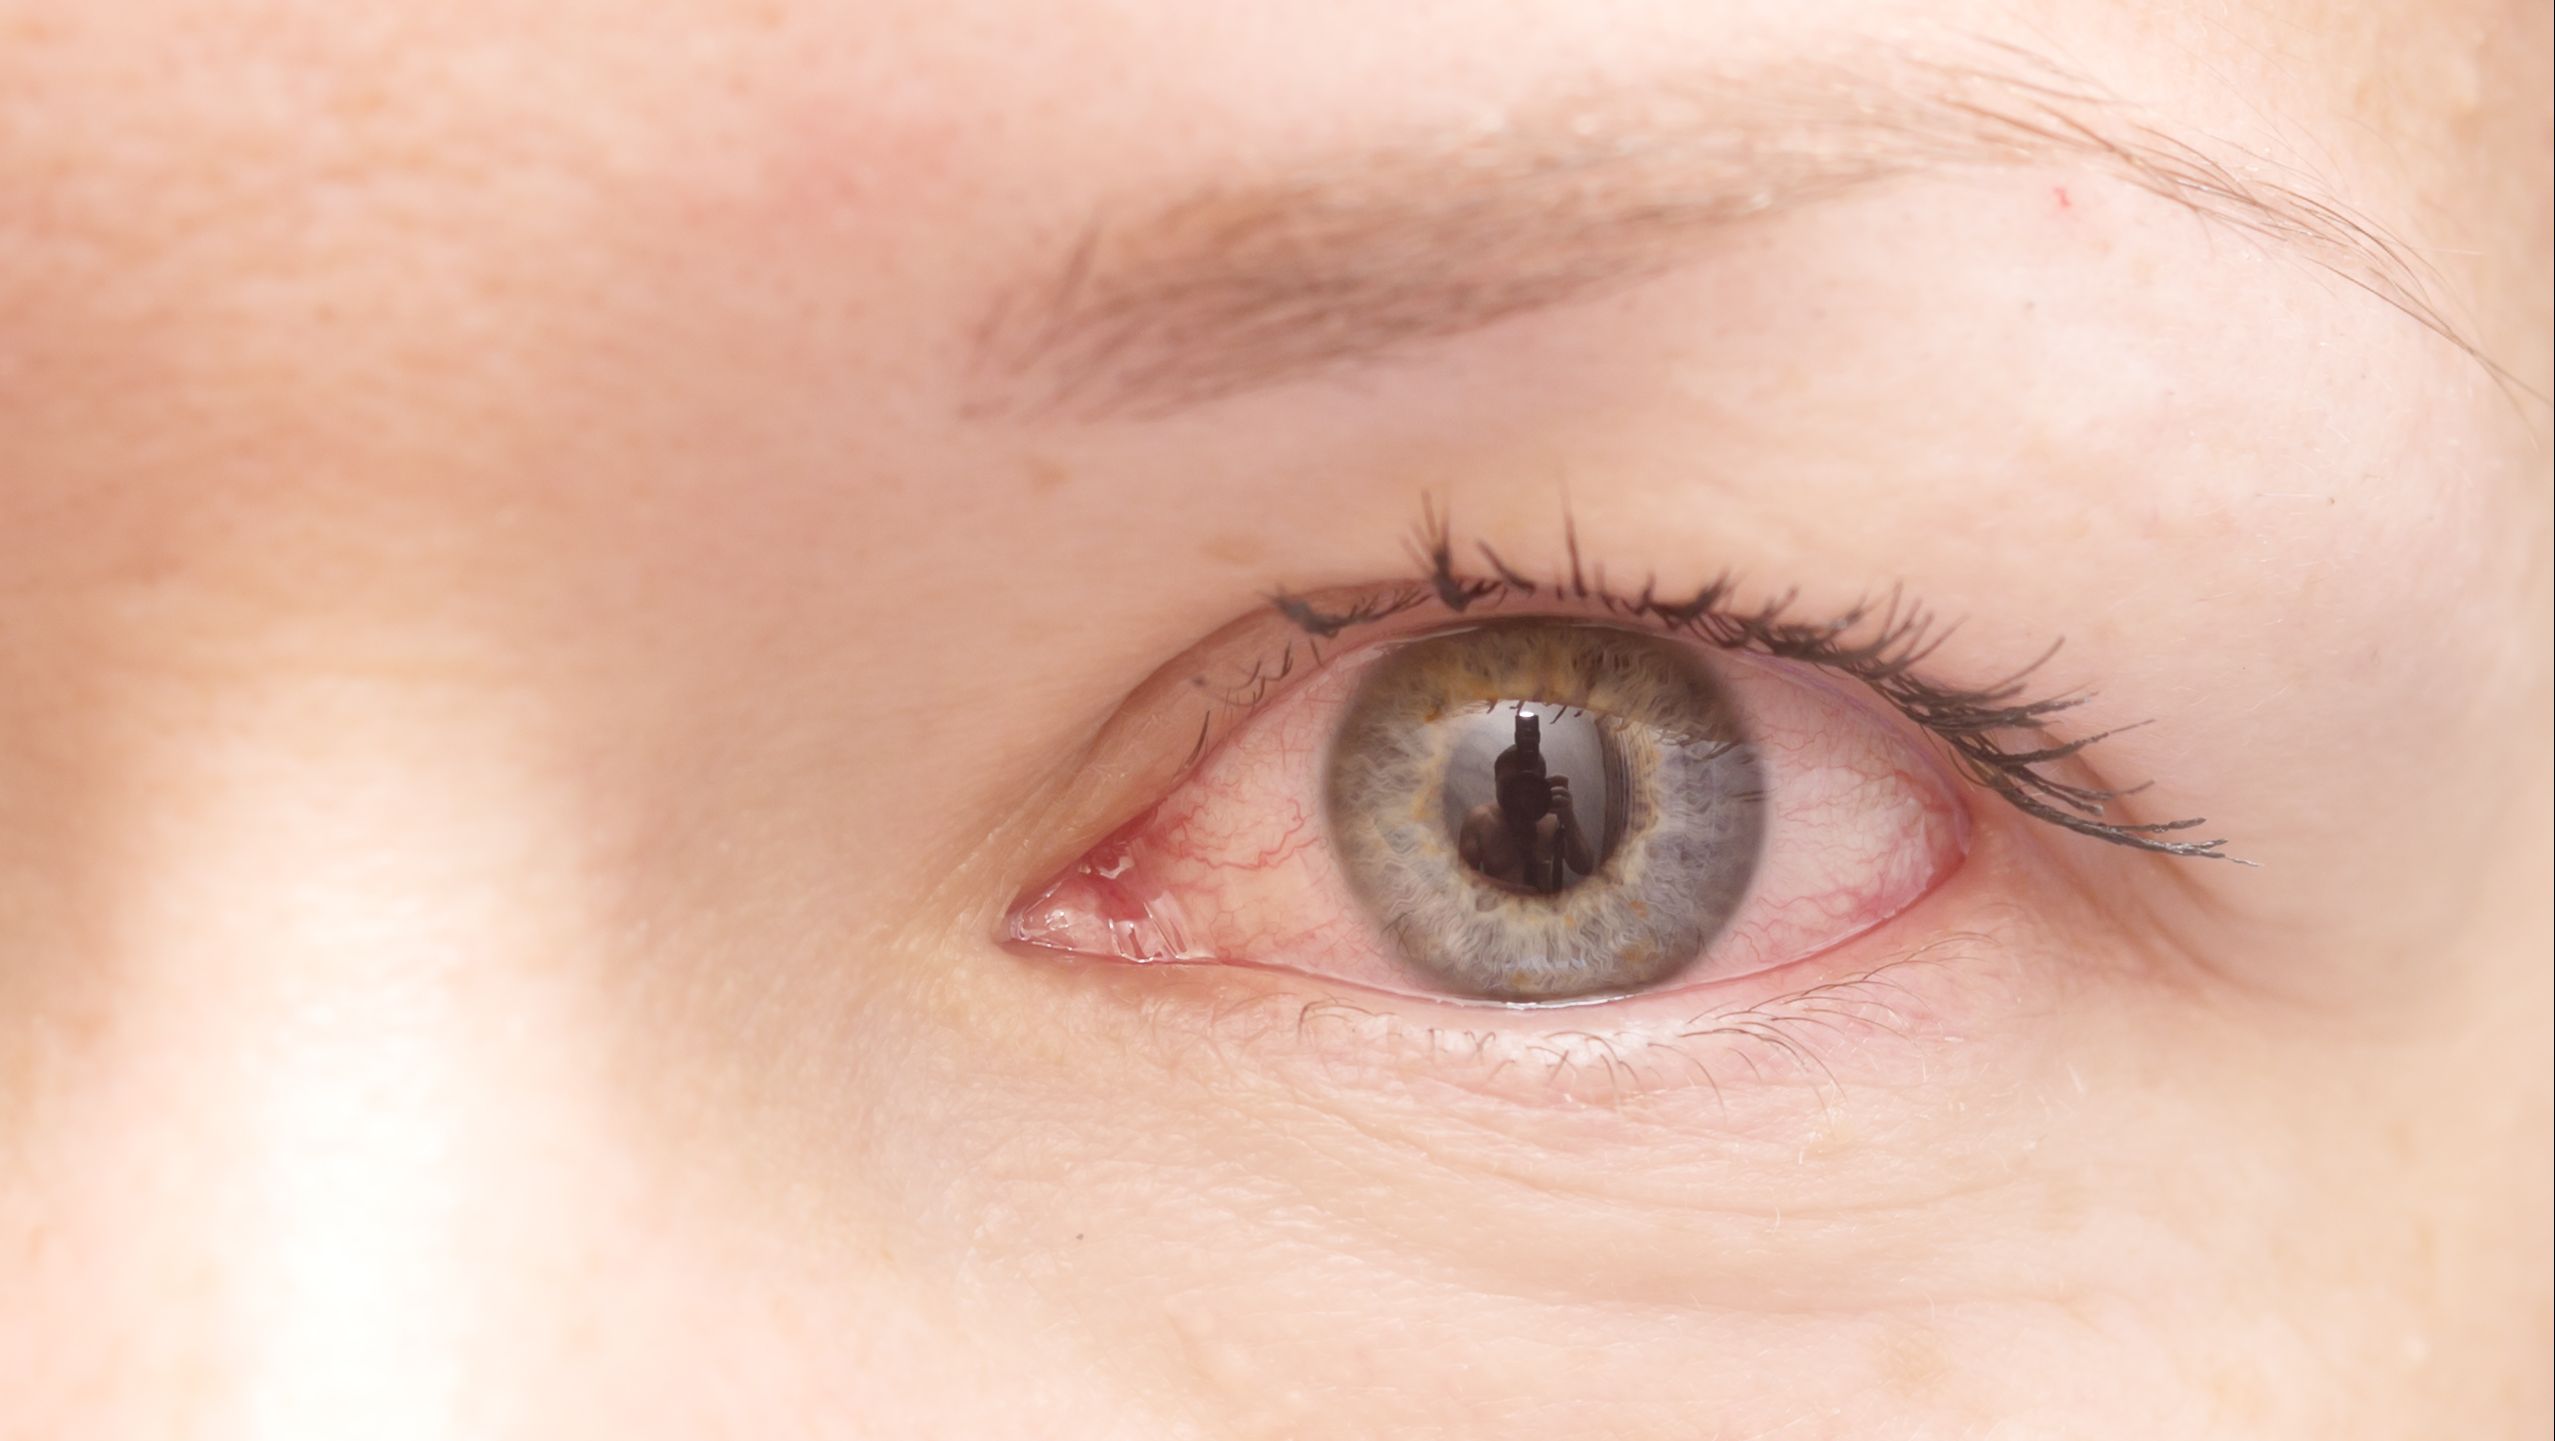 a close up of an irritated and inflamed eye that is red and bloodshot possibly with uveitis